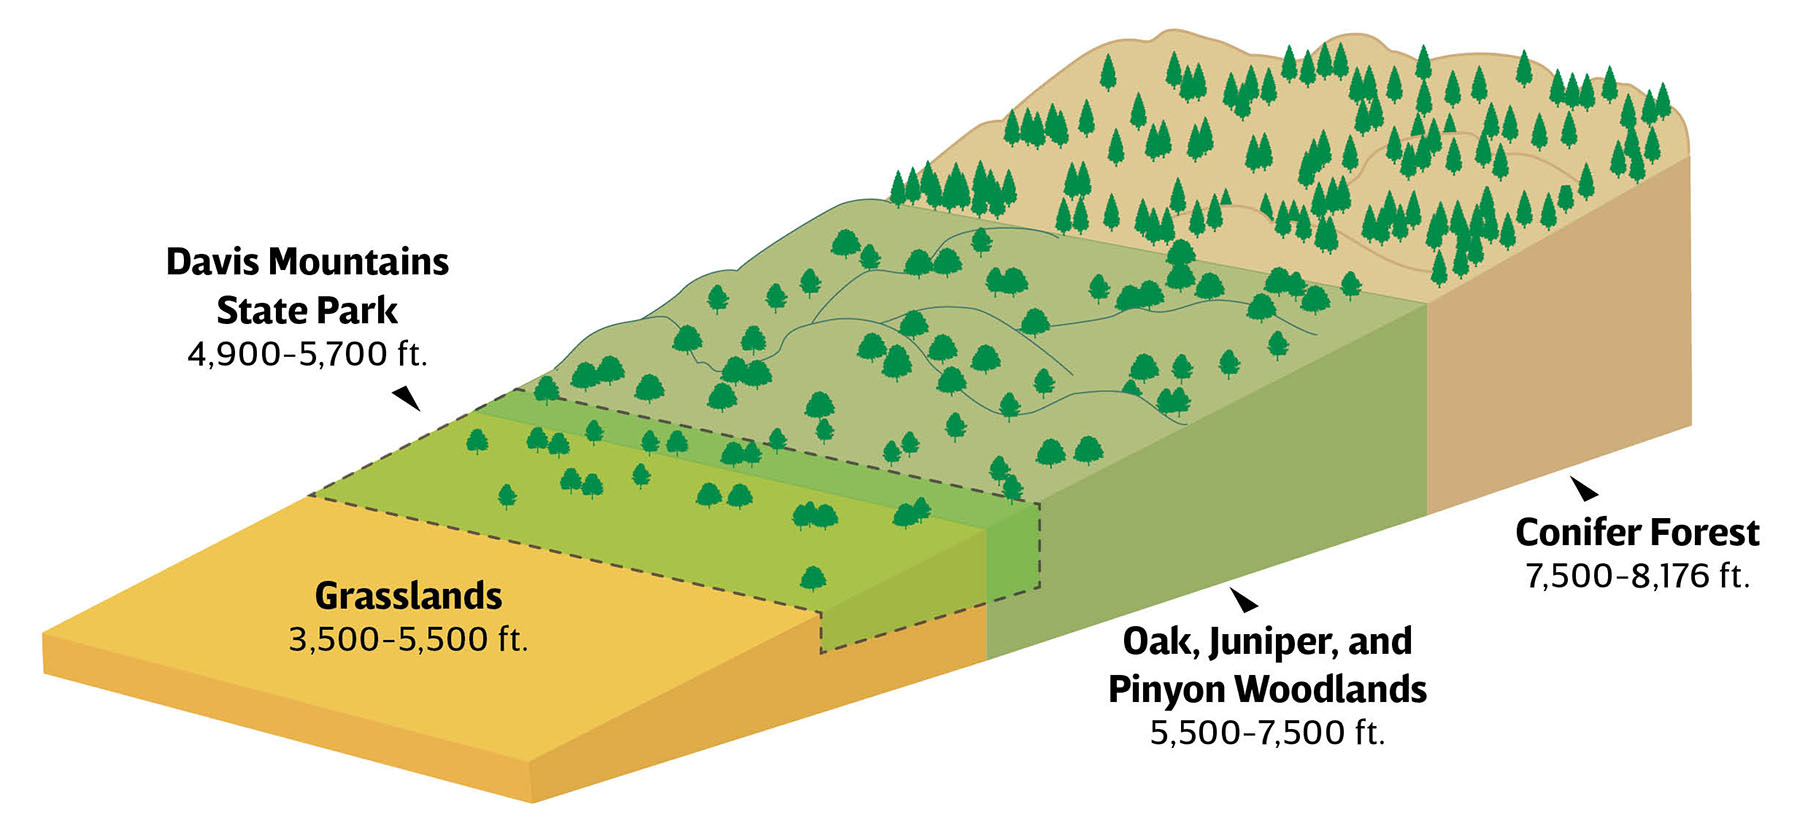 A diagram showing the elevation of the Davis Mountains and the unique ecosystem there